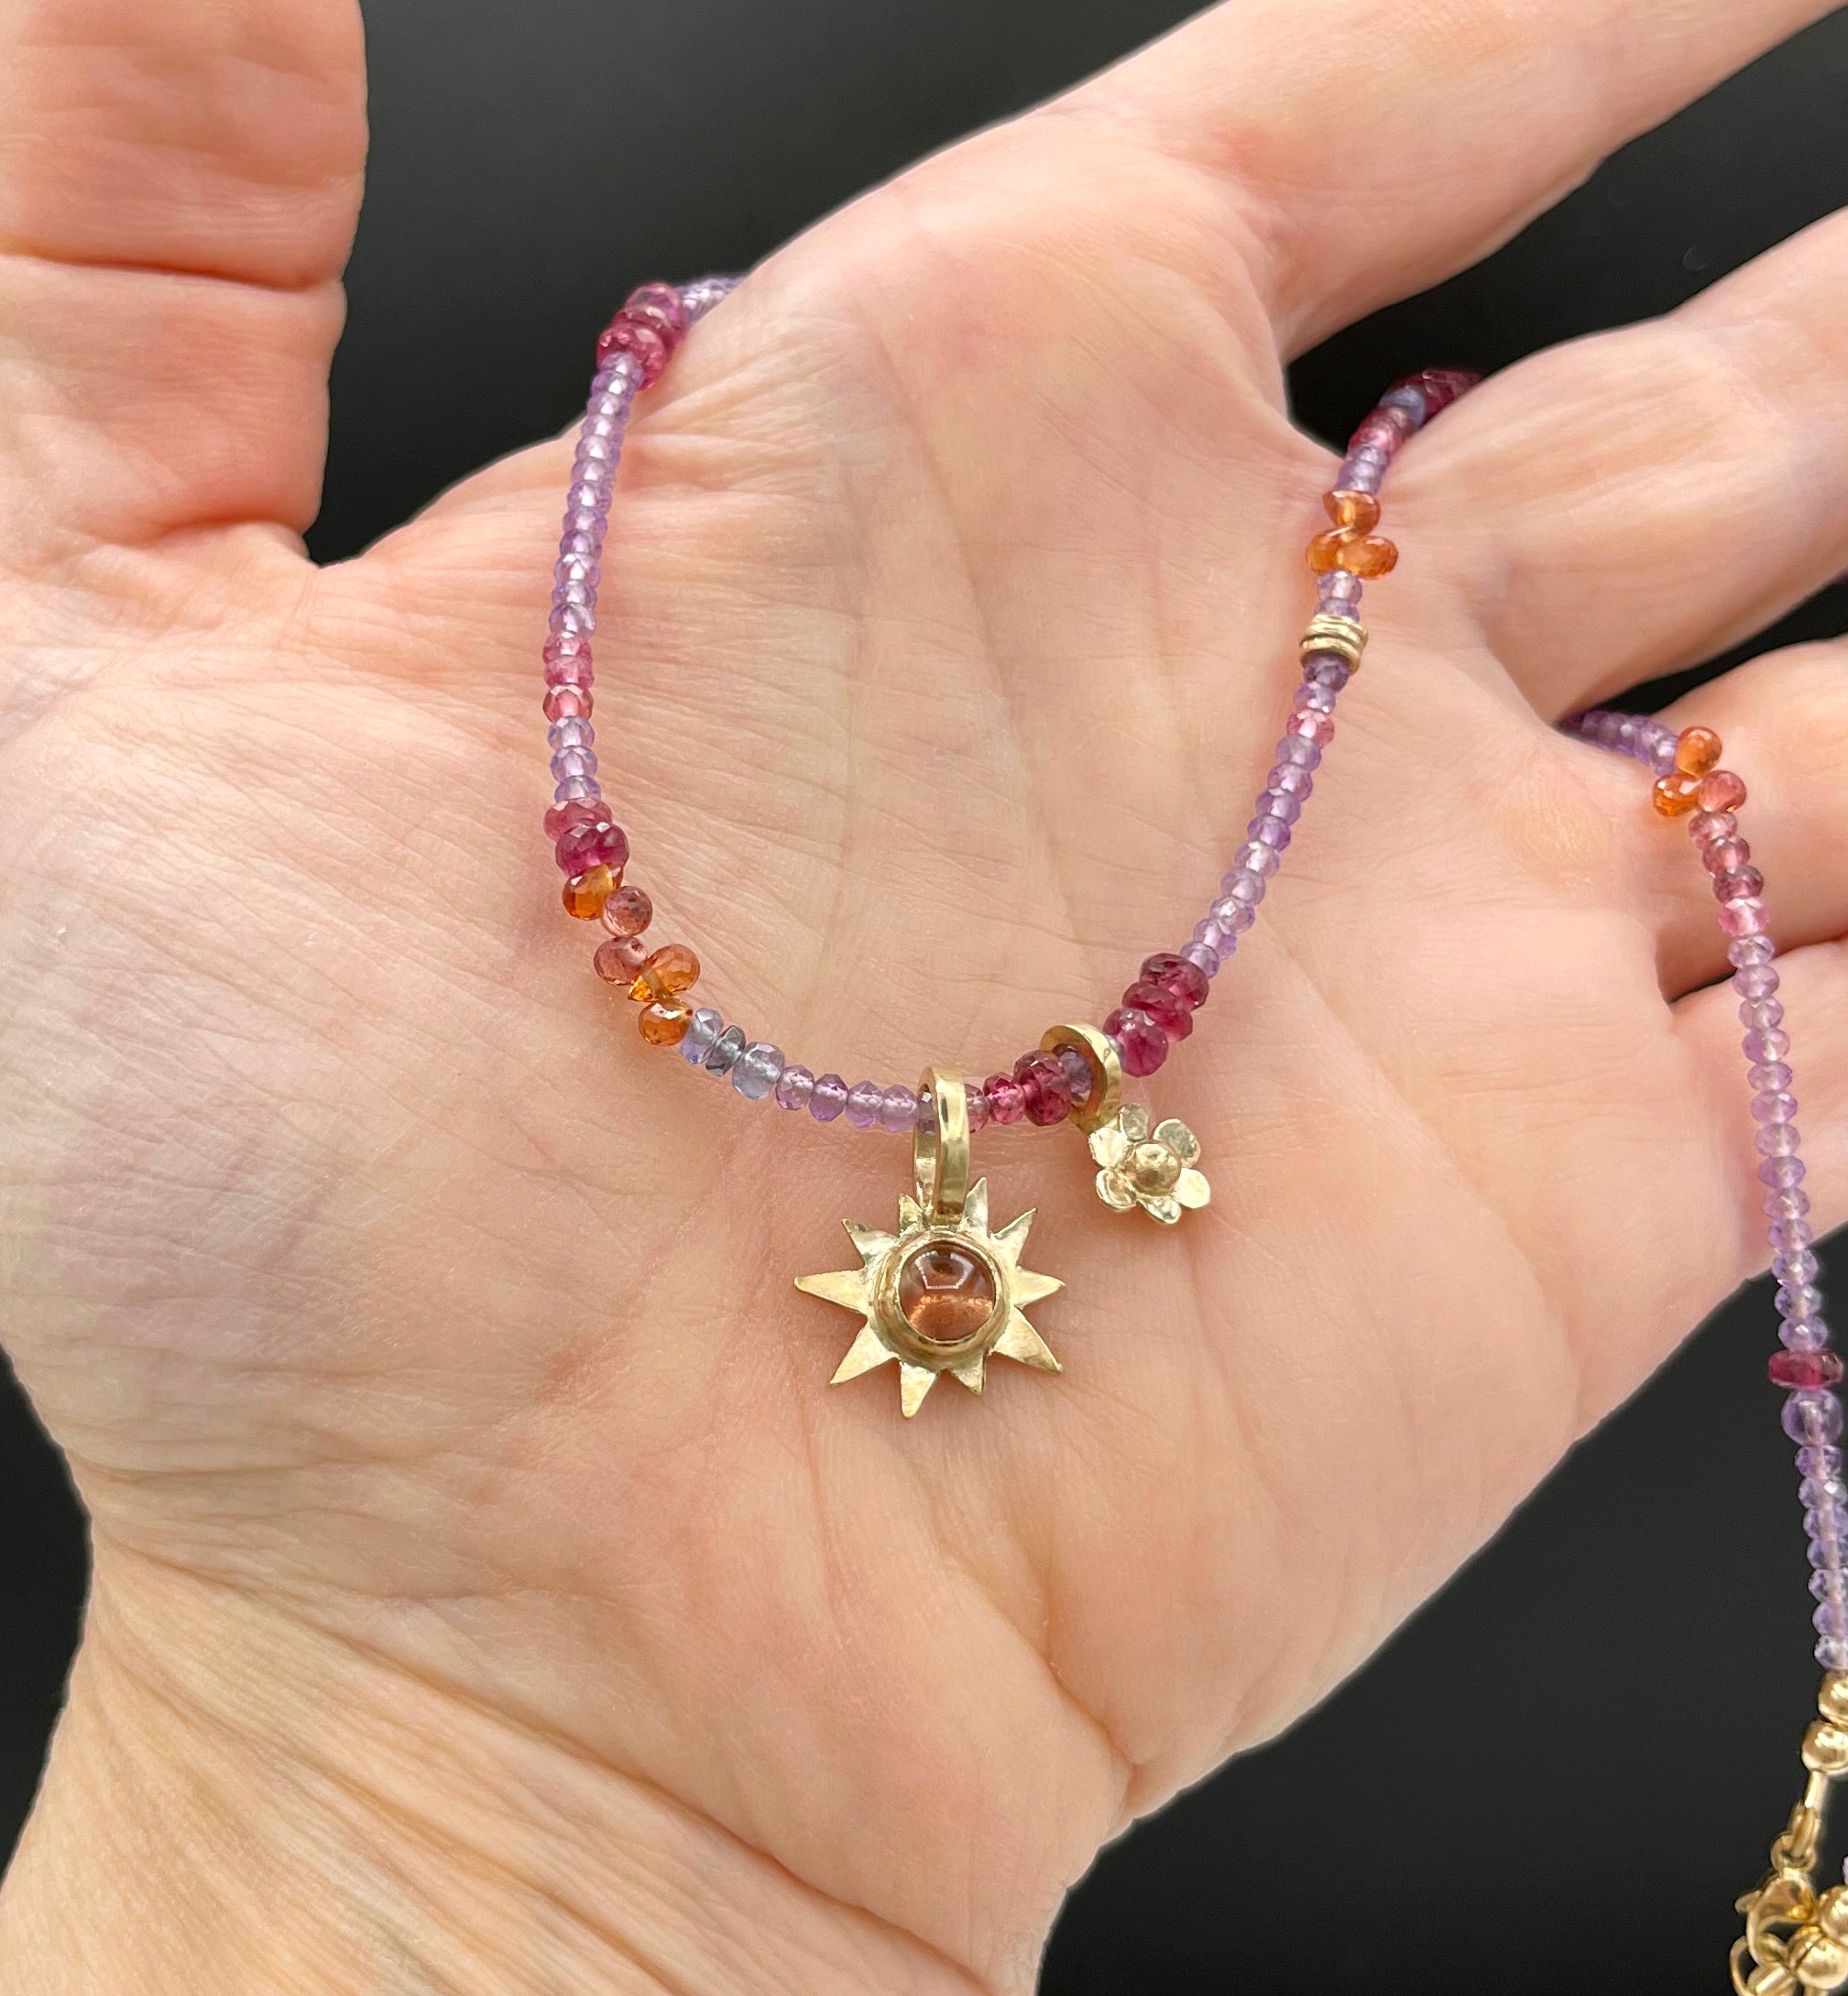 14K Amethyst, Sapphire and Rubellite Tourmaline Garden Sunrise Necklace, One of a Kind